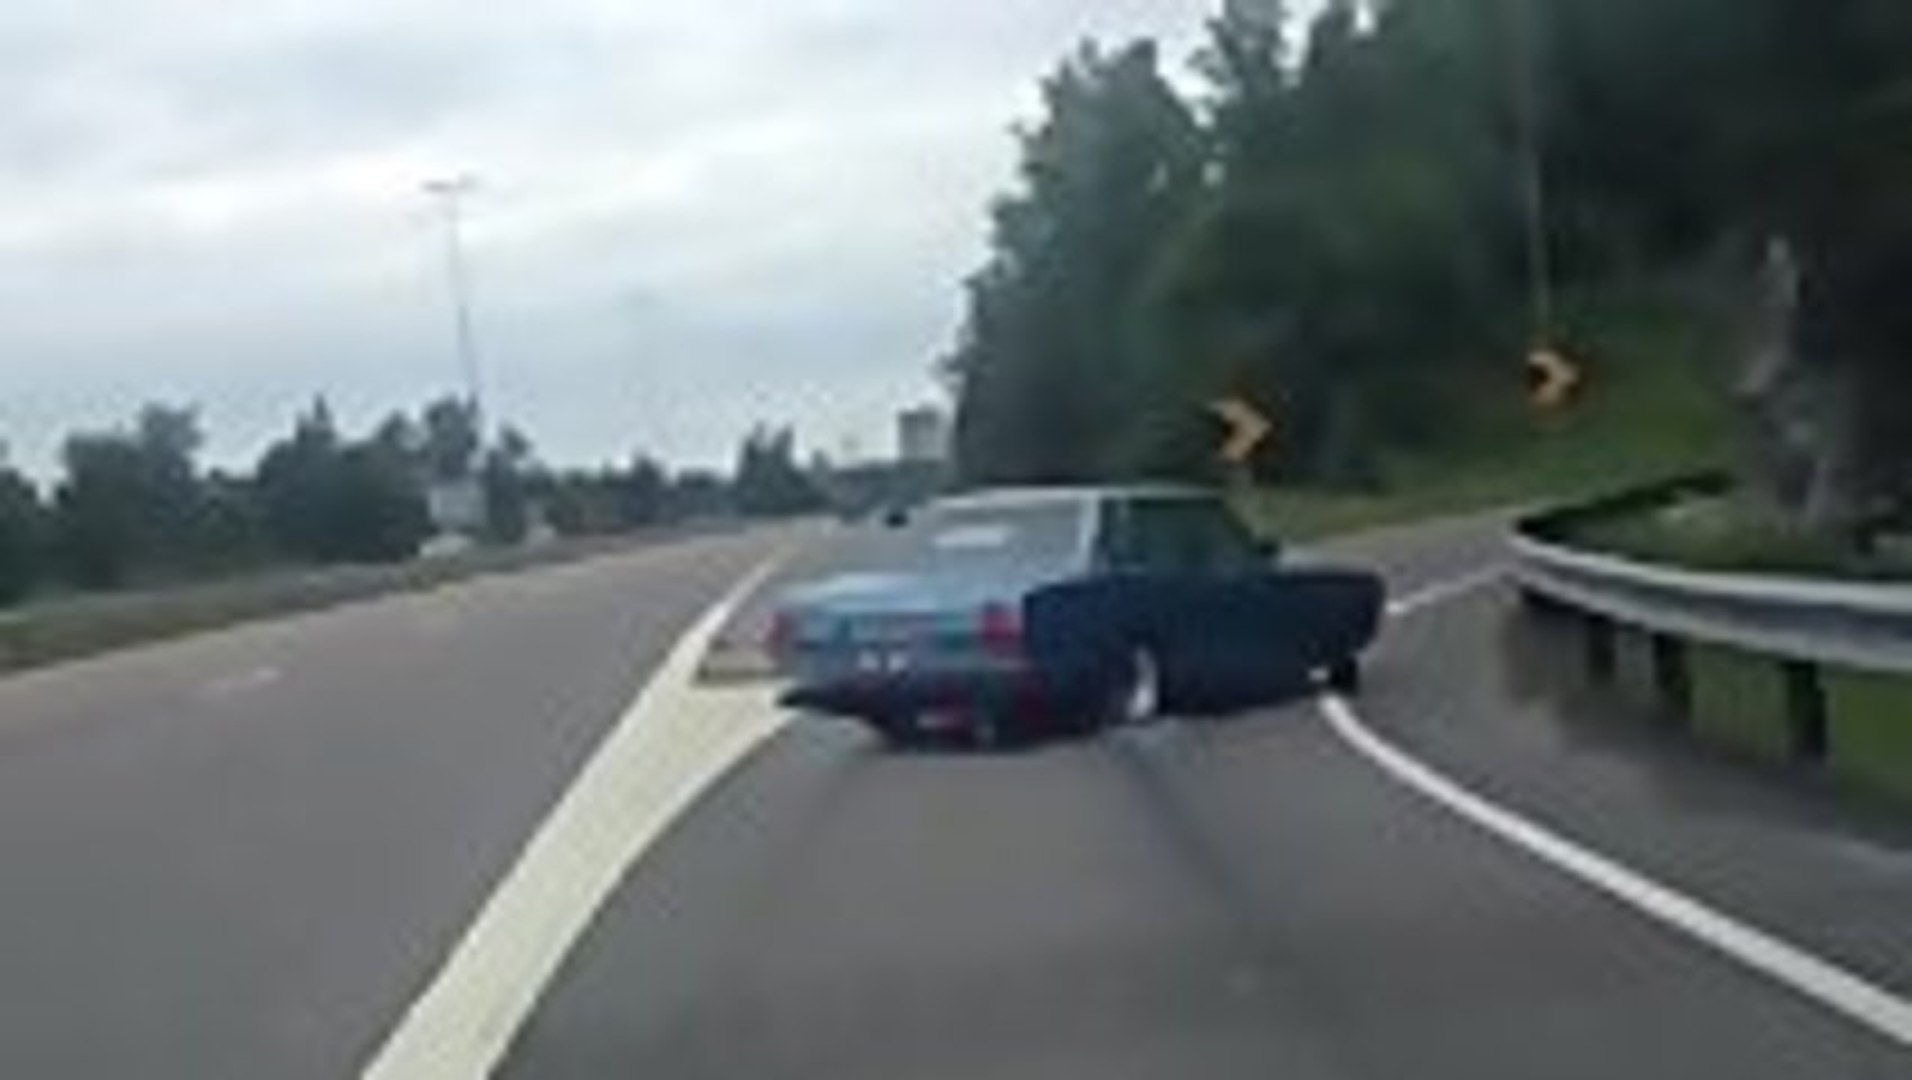 How to exit freeway like a boss (ORIGINAL UPLOAD) 